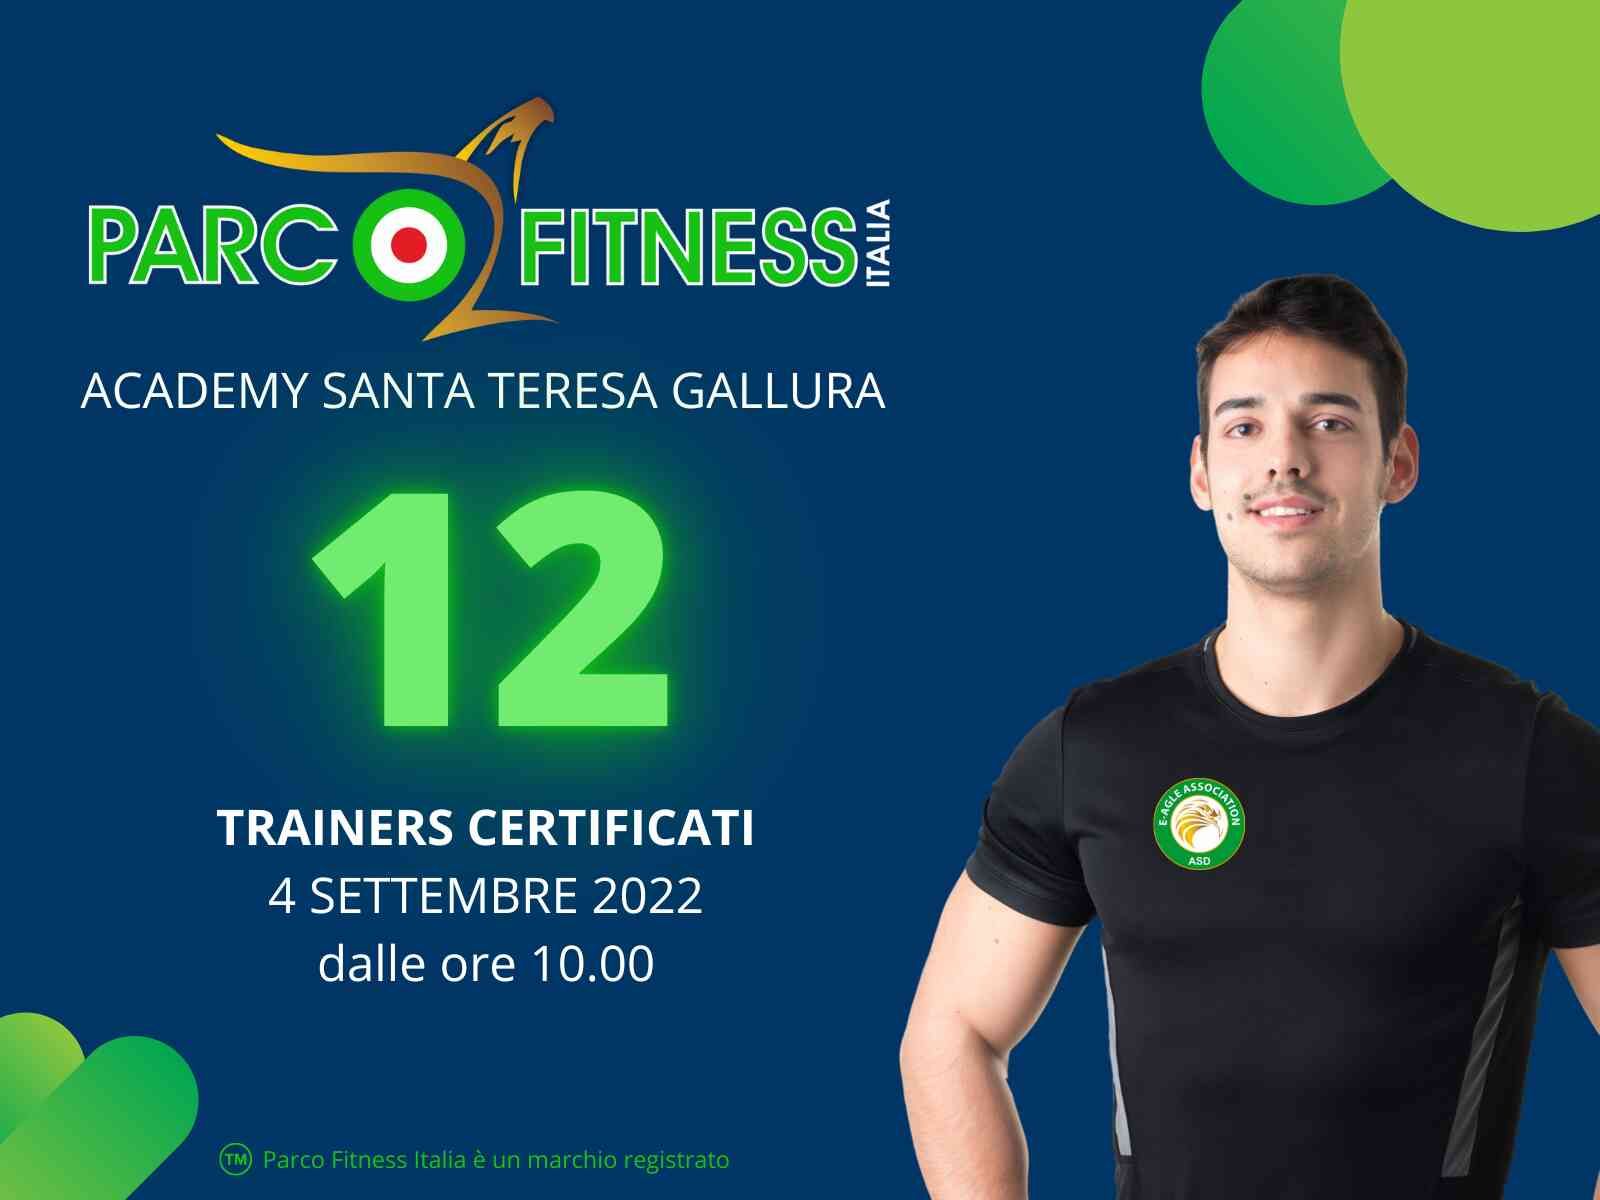 Parco Fitness Trainer